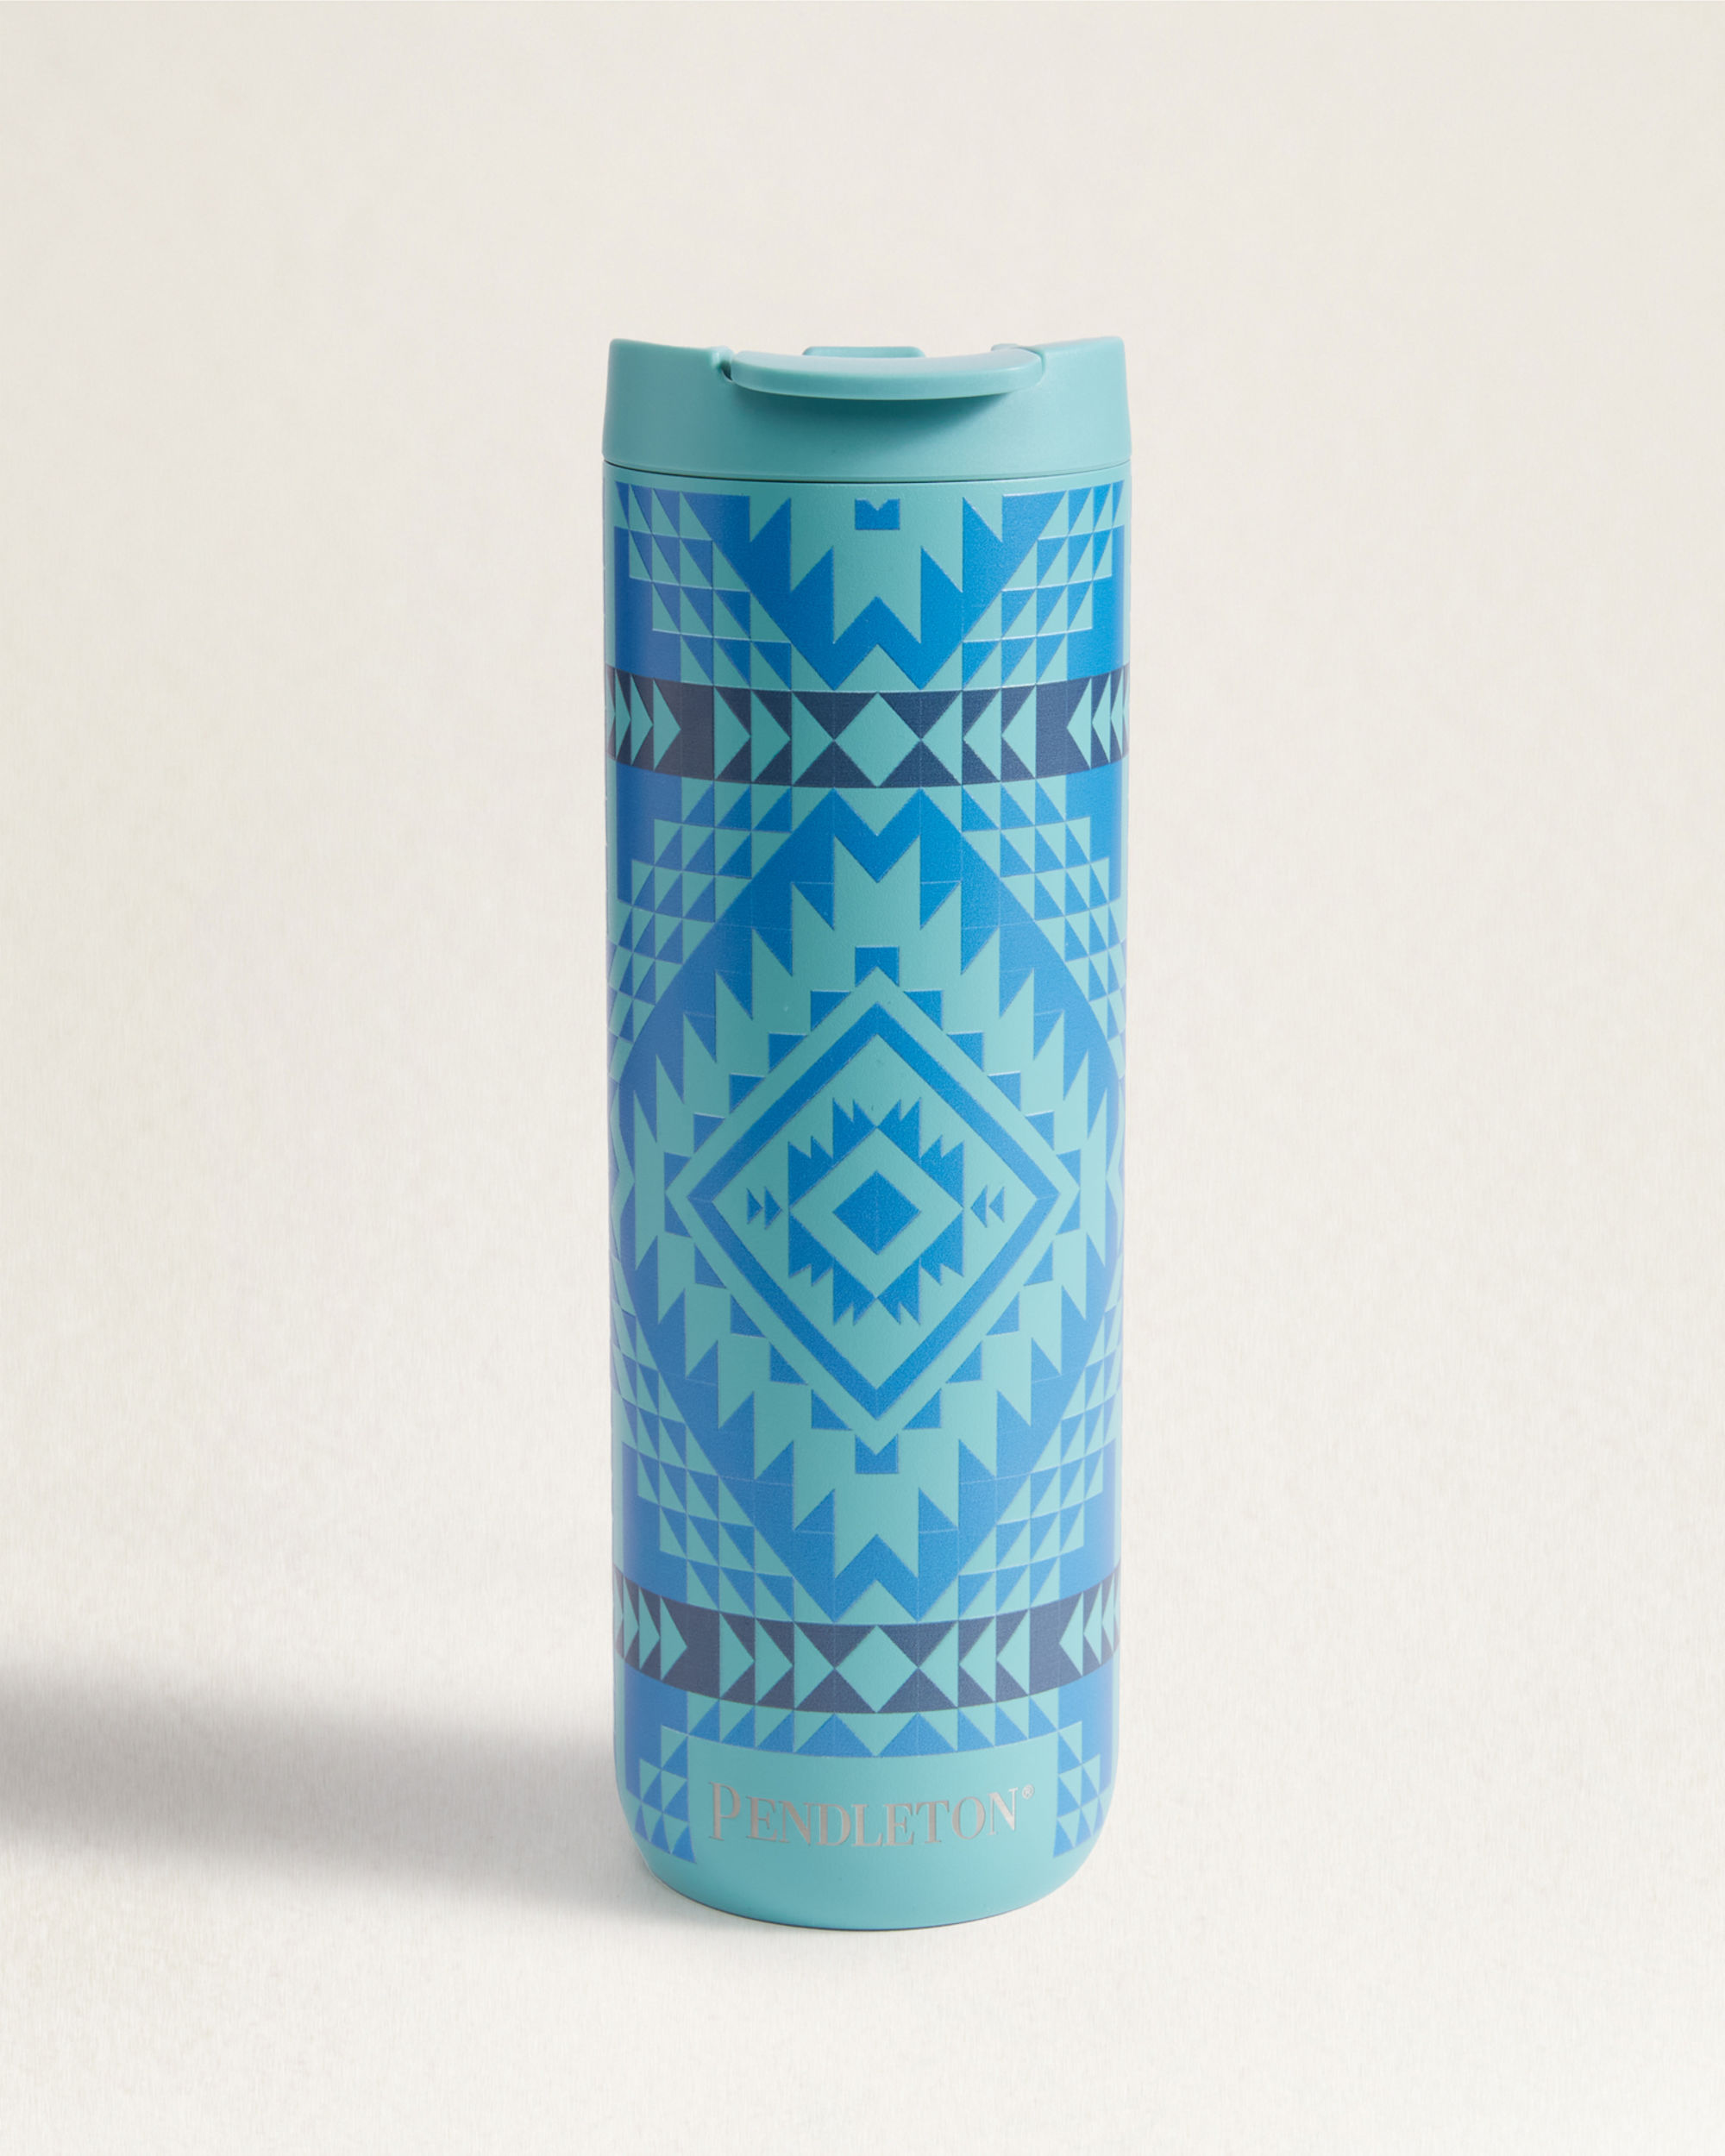 Pendleton Patterned 20oz Stainless Steel Hot/Cold Tumbler Set (White and  Teal)